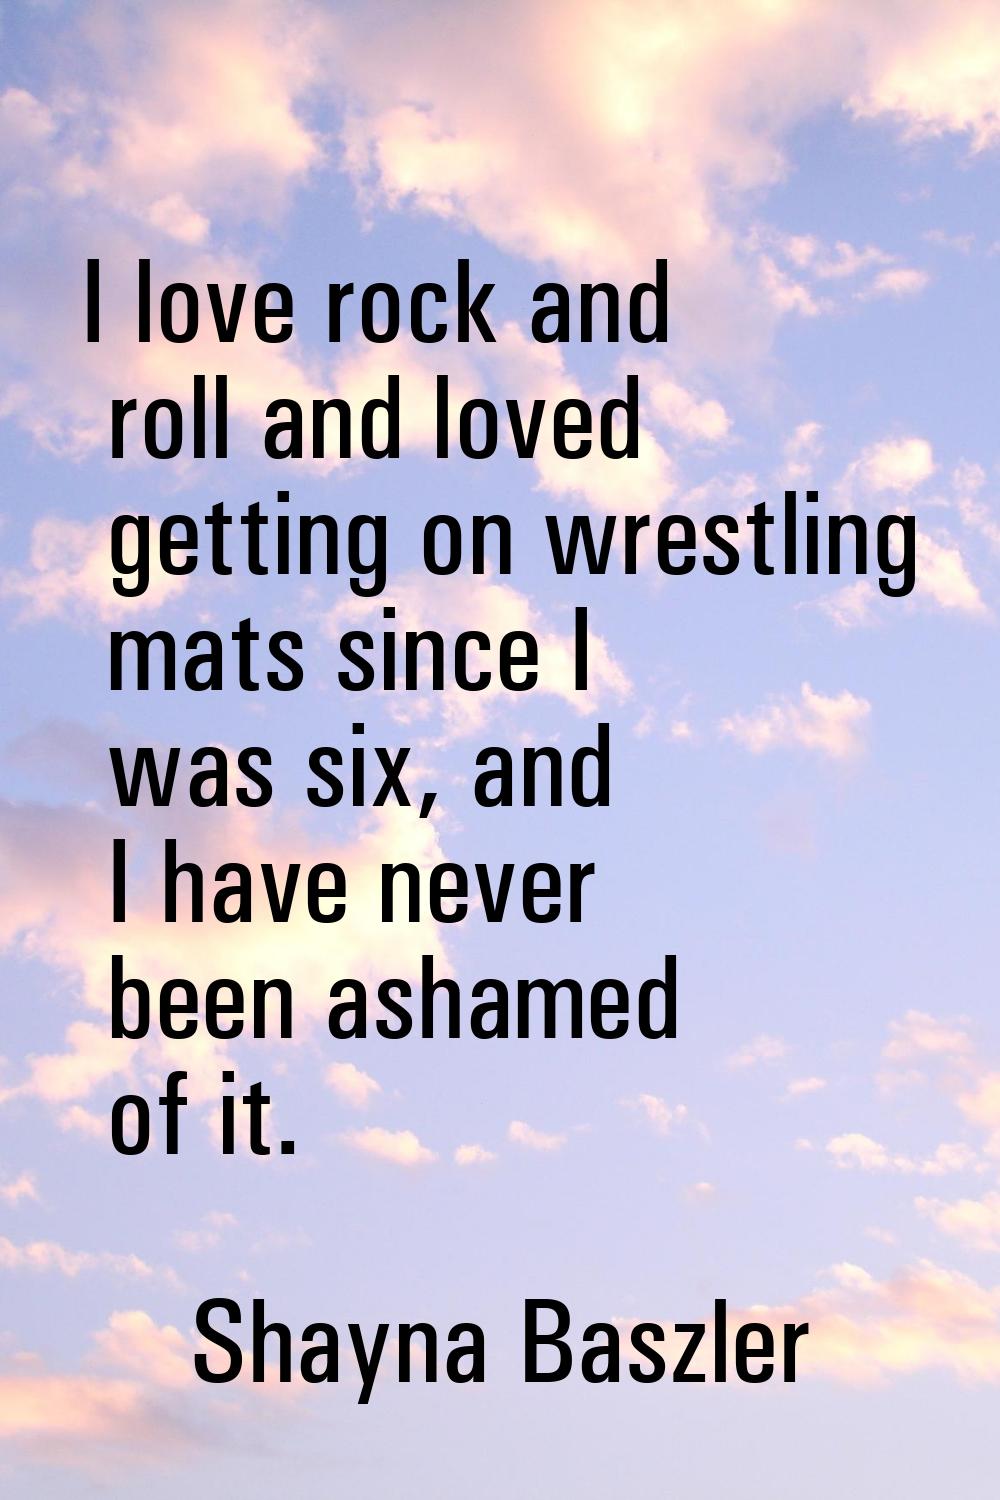 I love rock and roll and loved getting on wrestling mats since I was six, and I have never been ash